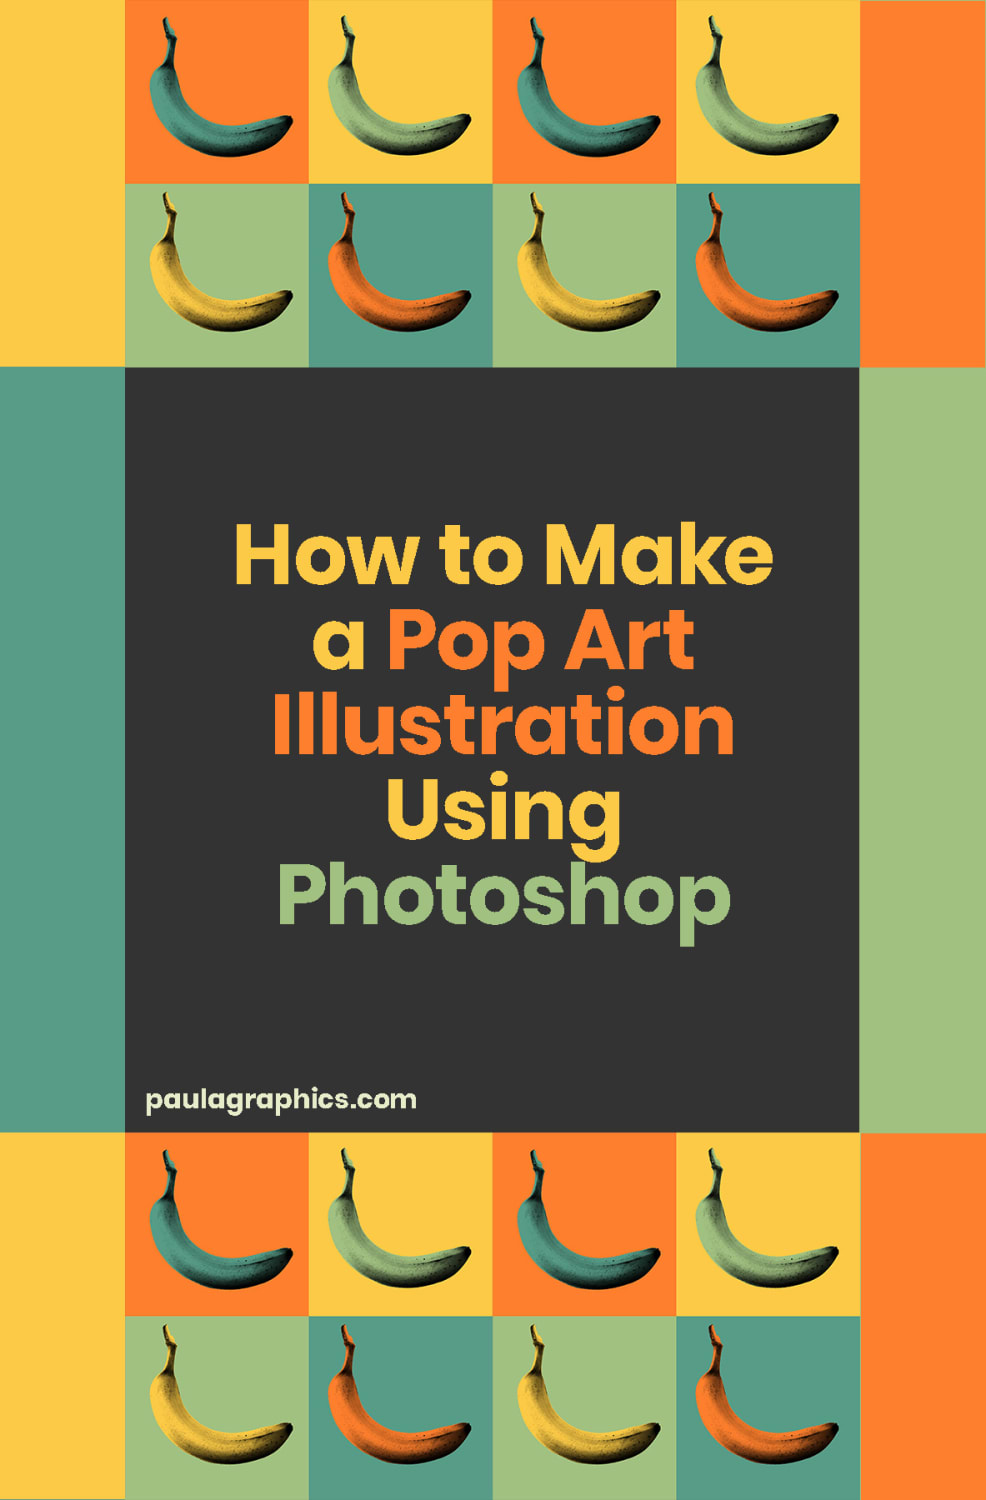 How to Make a Pop Art Illustration Using Photoshop